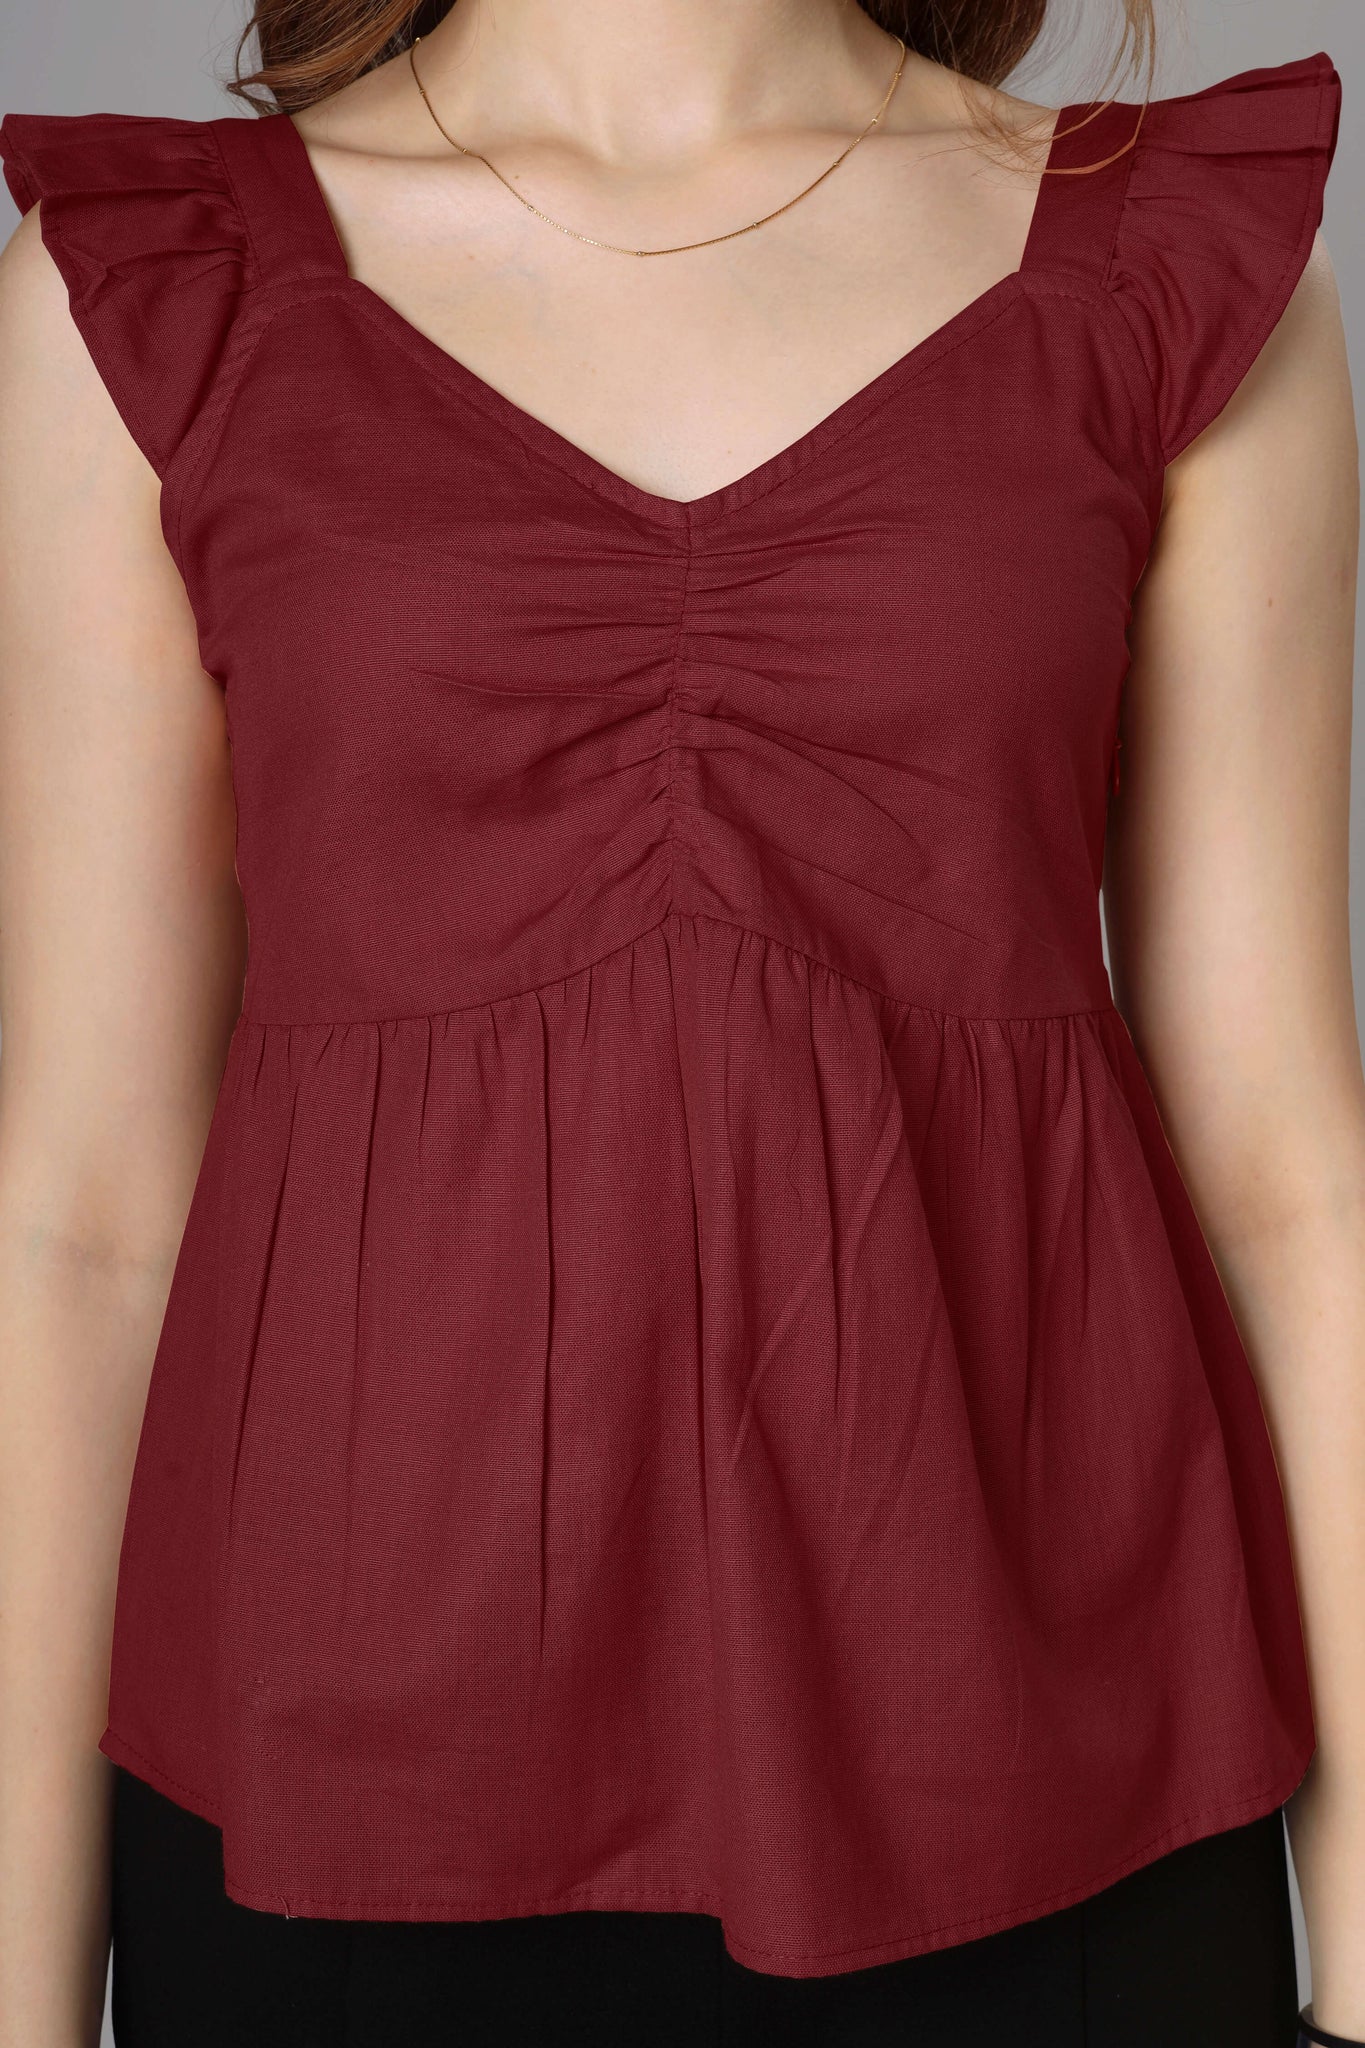 Classic Maroon Cotton Top For Women